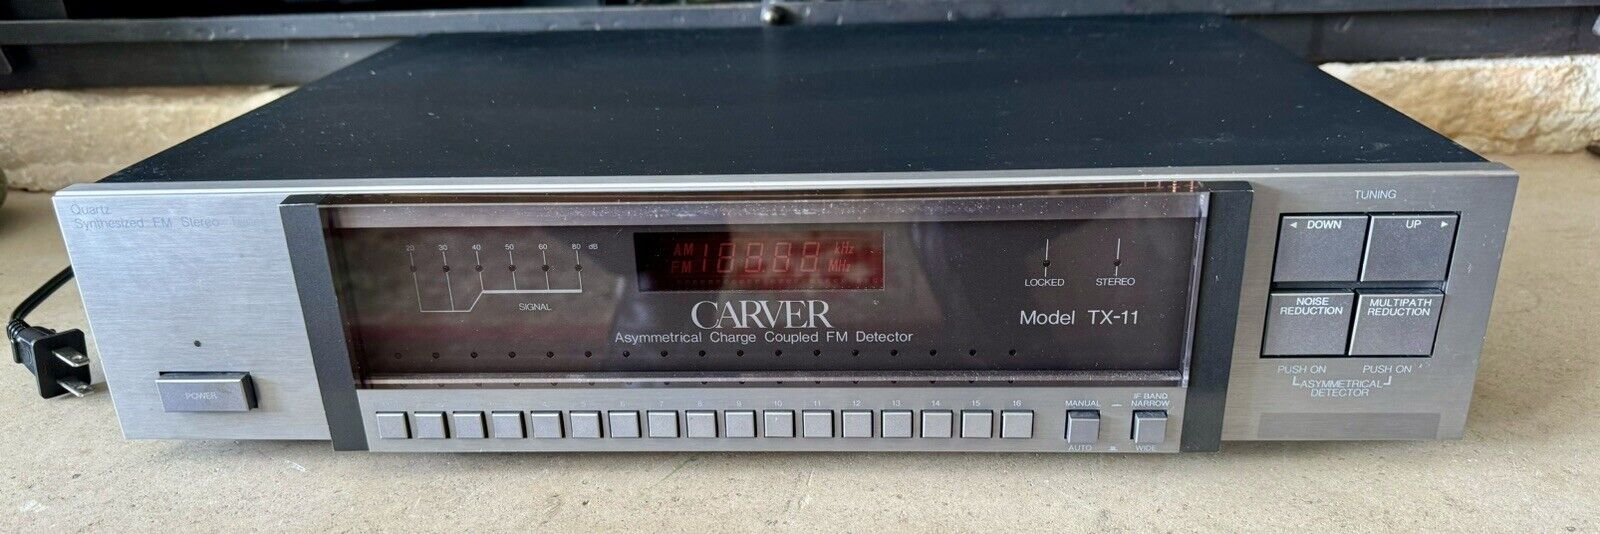 Mint Carver Asymmetrical Charge Coupled FM Detector Tuner Model TX-11